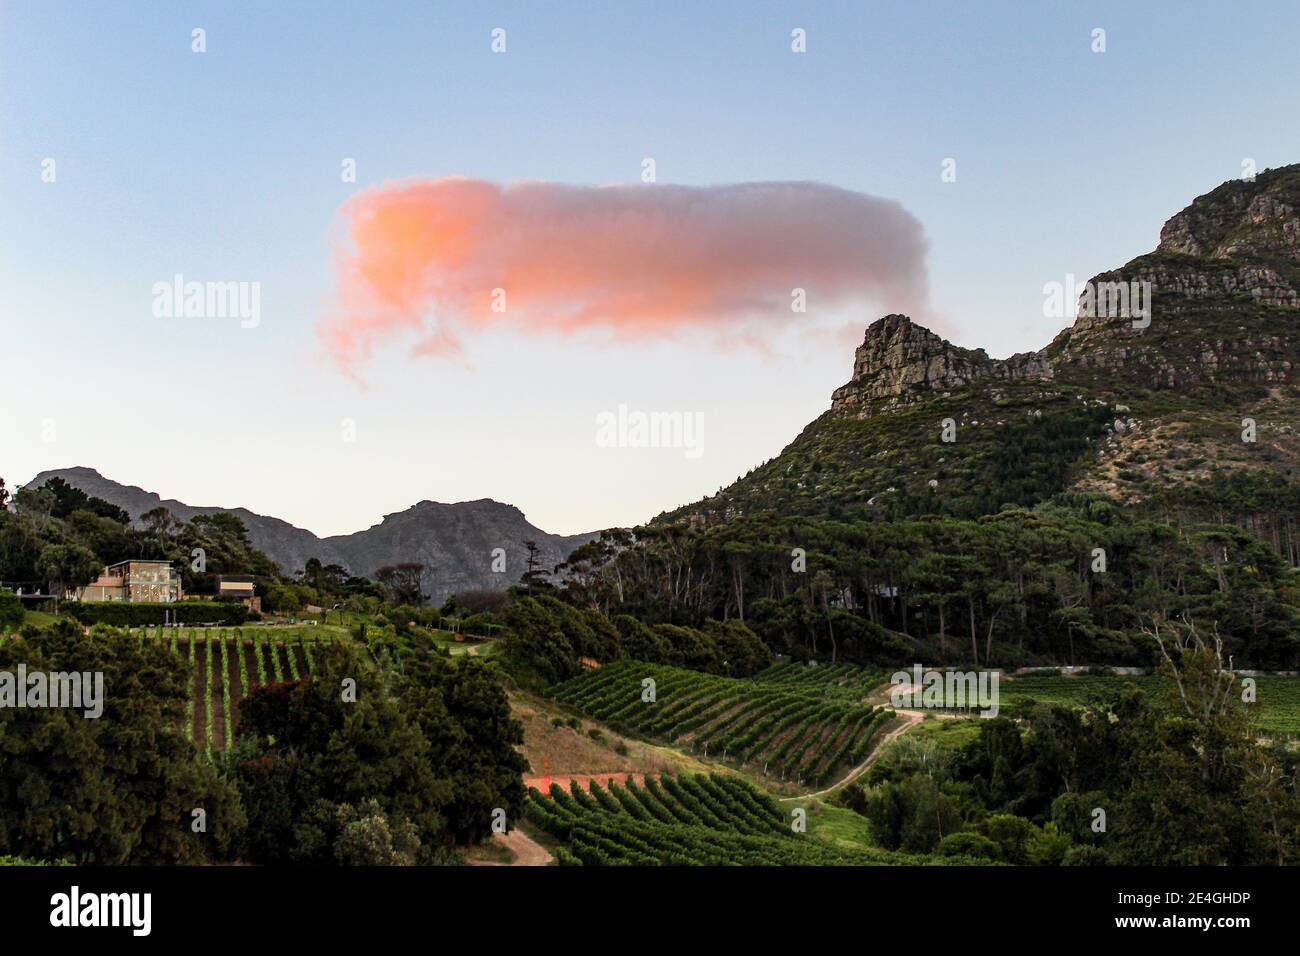 Curious cloud formation at sunset on Constantia Glen vineyard in the wine lands of Cape Town, South Africa Stock Photo